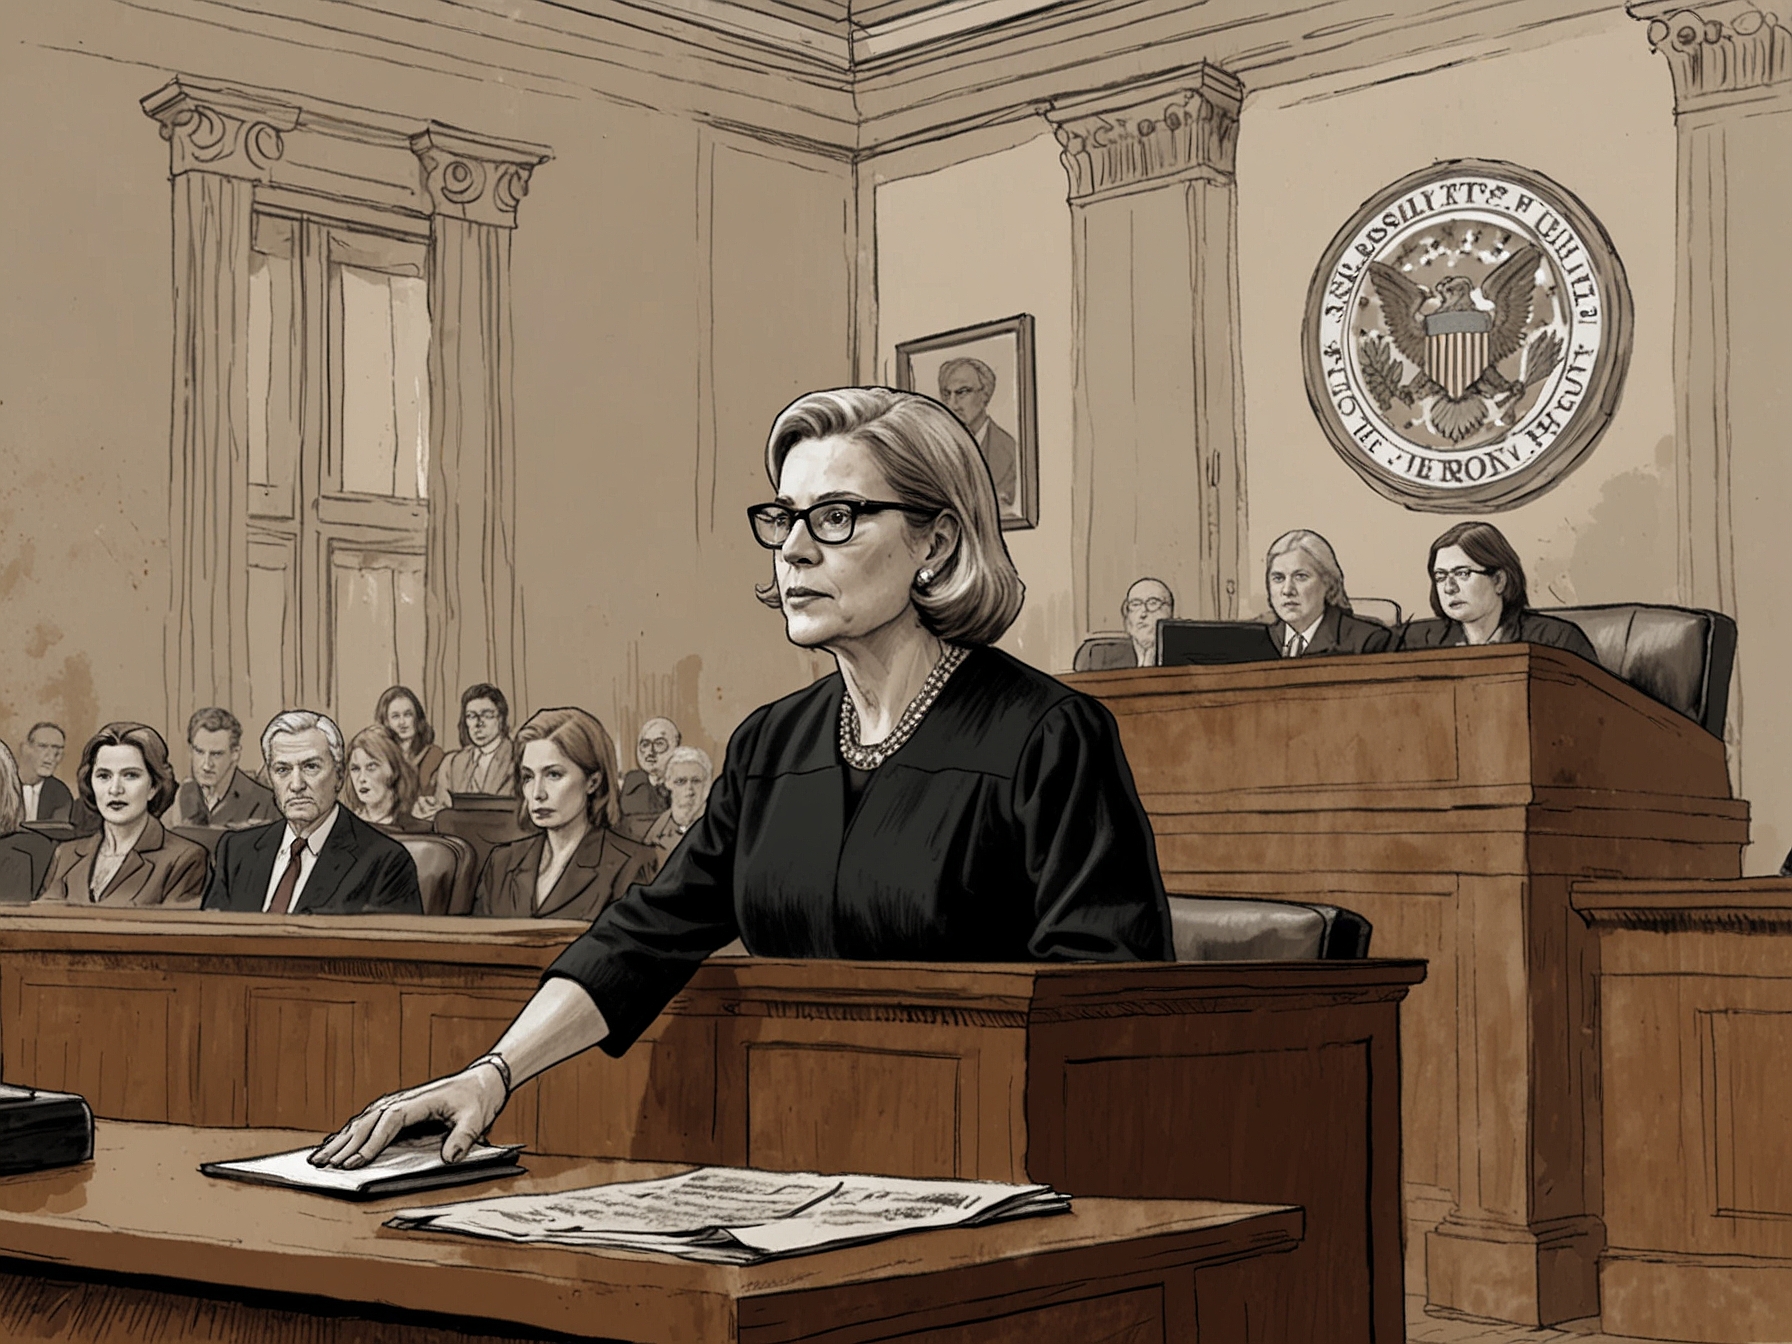 An illustration showing Judge Aileen Cannon presiding over a courtroom, with imagery indicating tension and headlines referencing increased threats against the FBI.